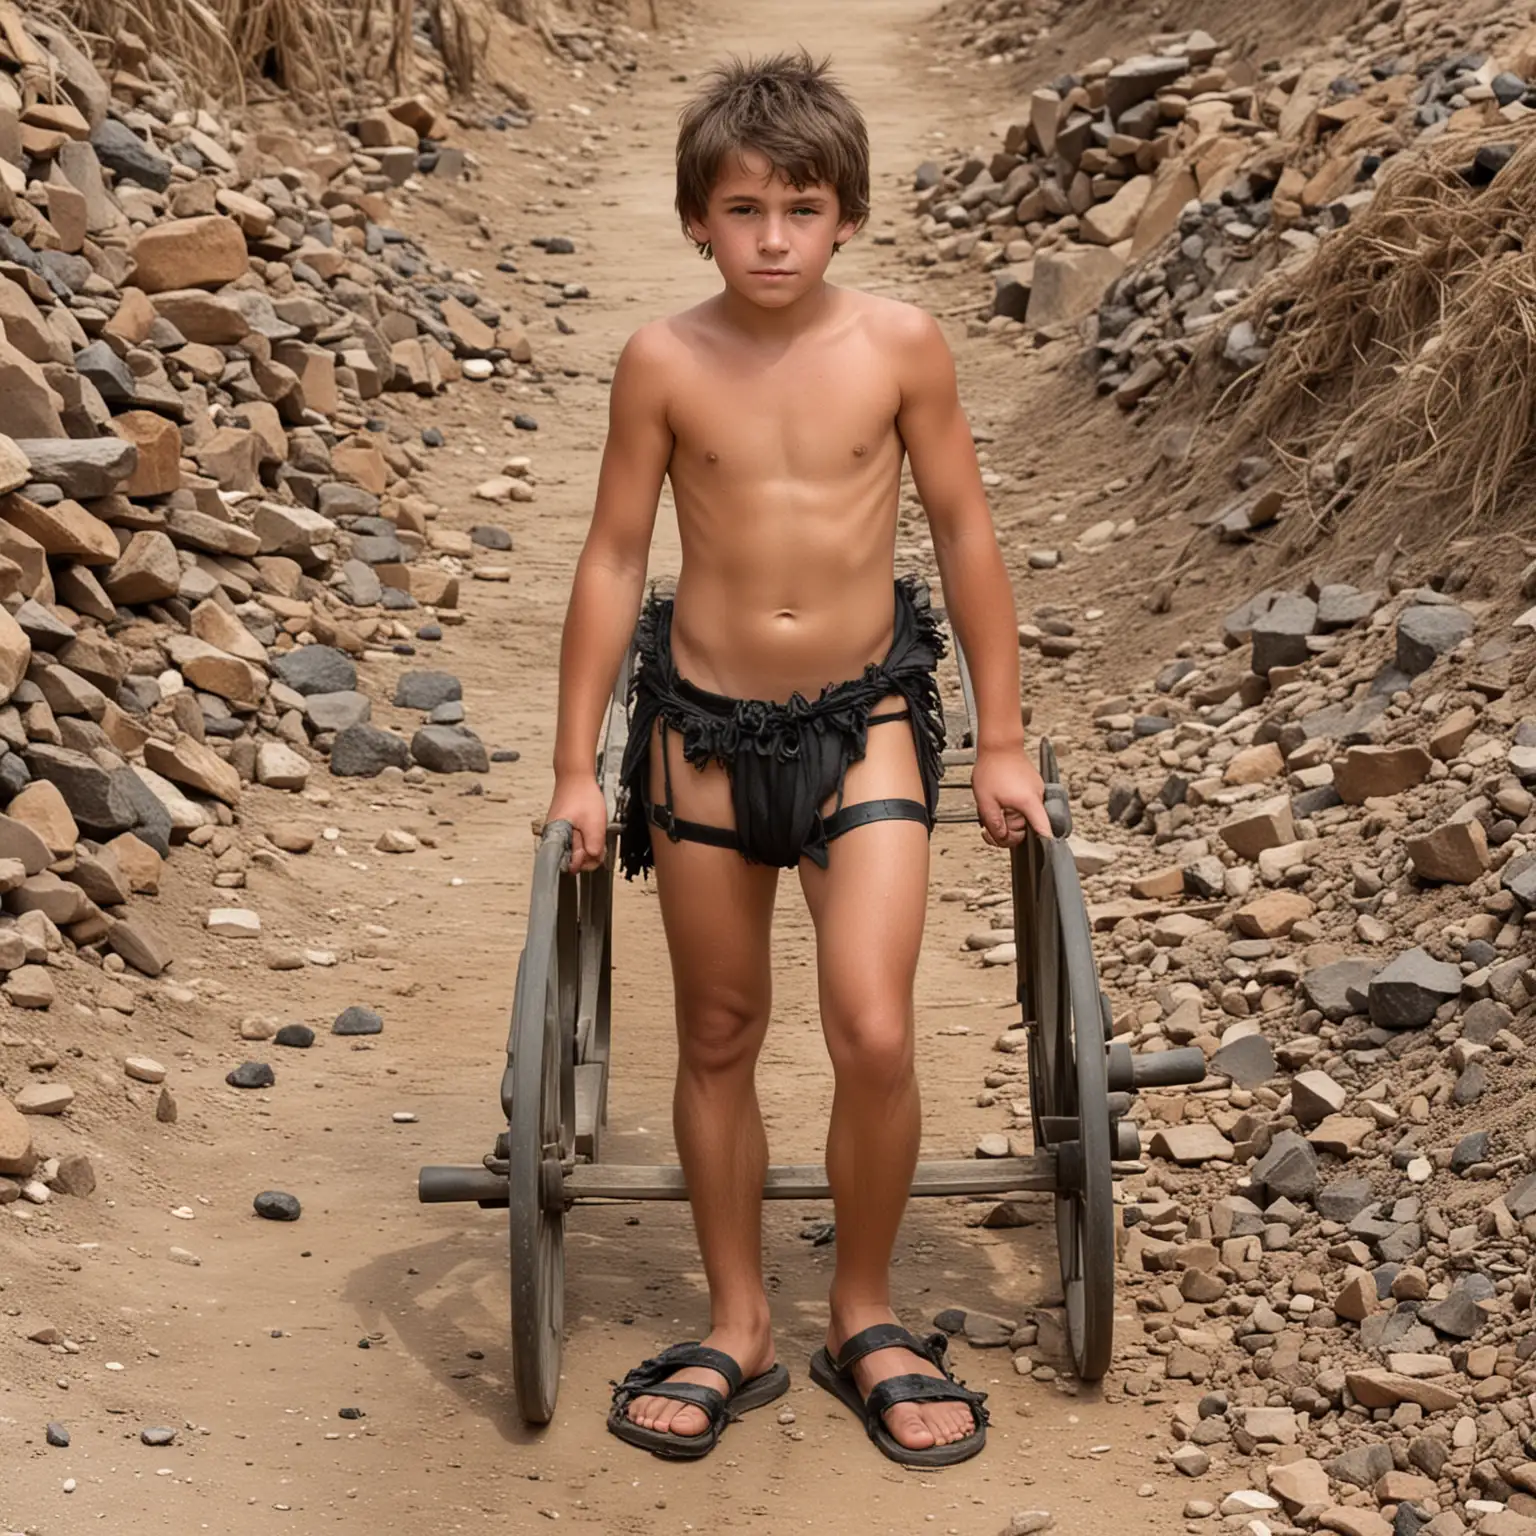 Adorable 18YearOld Boy in Sexy Slave Costume Pulling Heavy Coal Cart